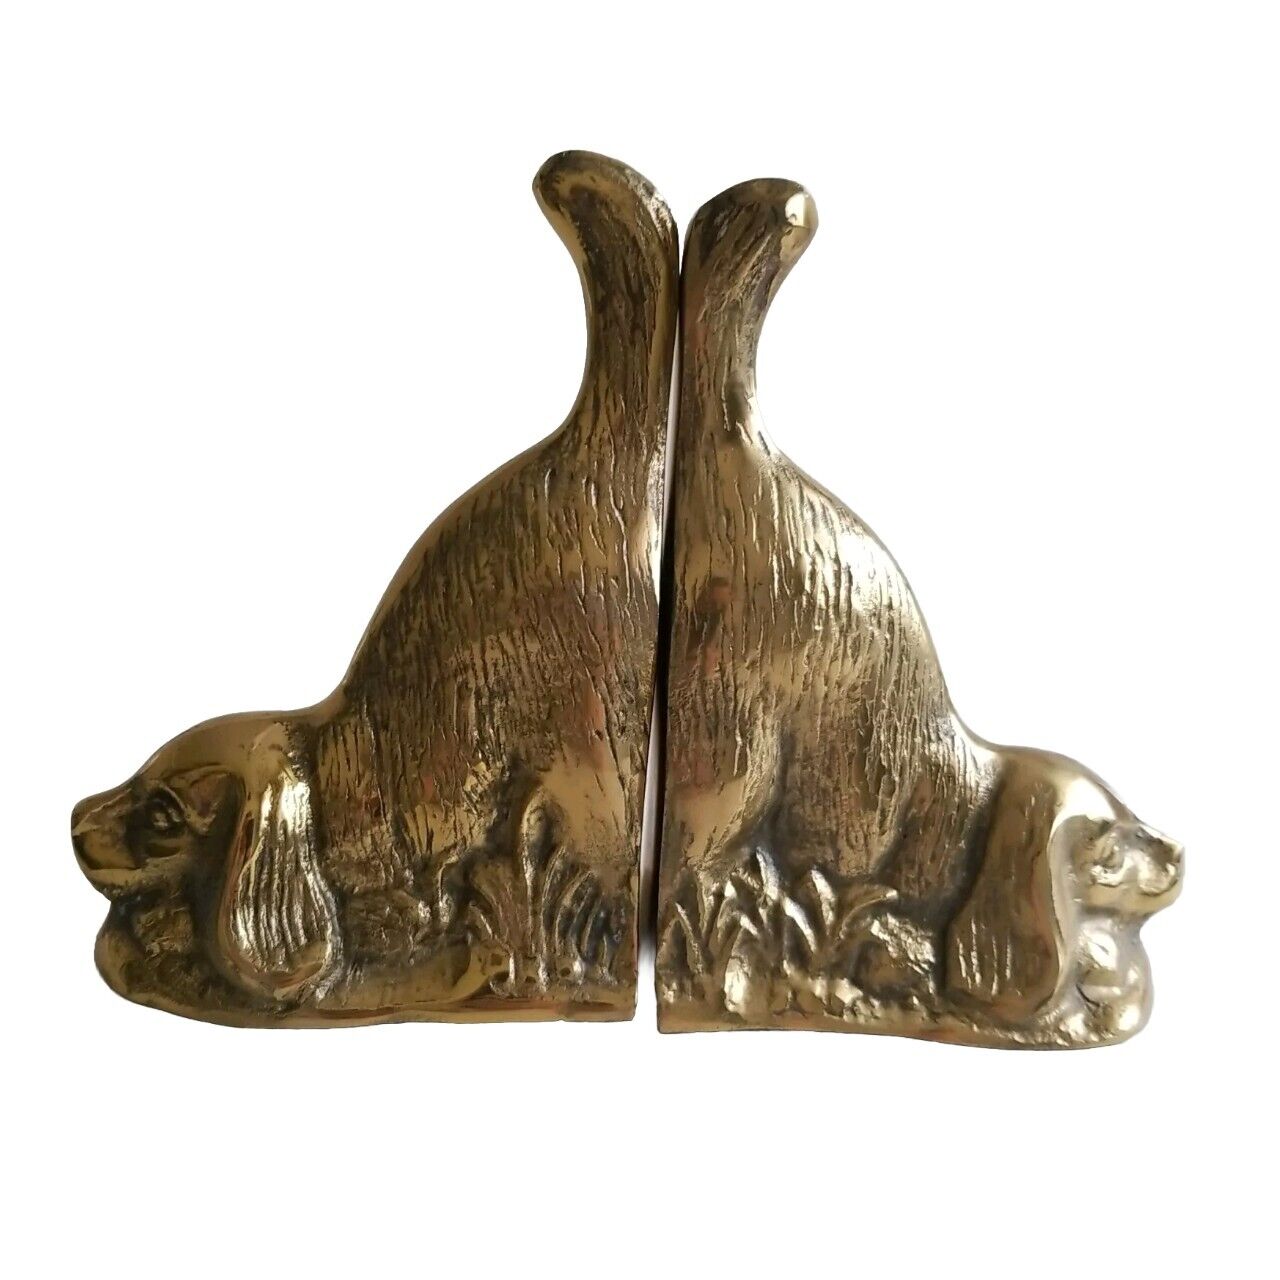 VTG Hunting / Playing Cocker Spaniel Puppy Dogs Solid Brass Bookends Gatco Korea